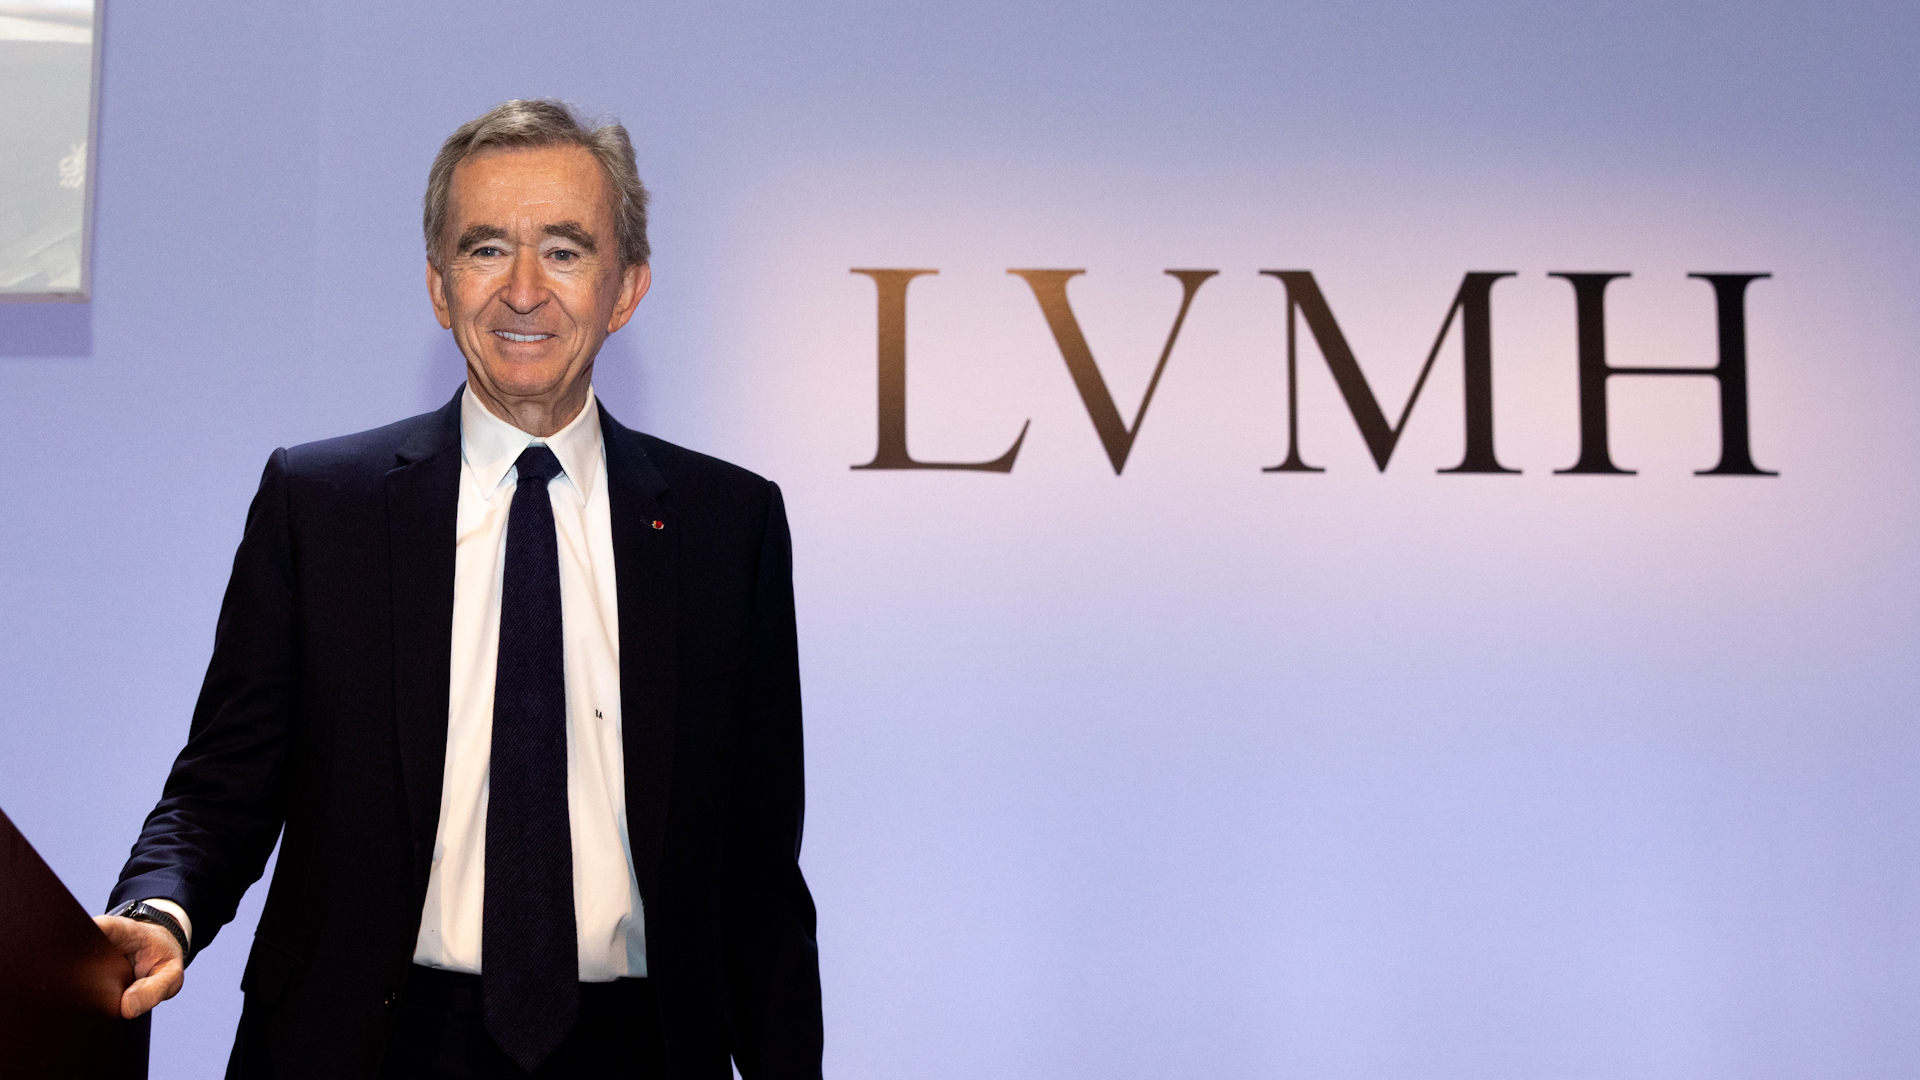 LVMH Boss and Hermès Family in Pact - The New York Times